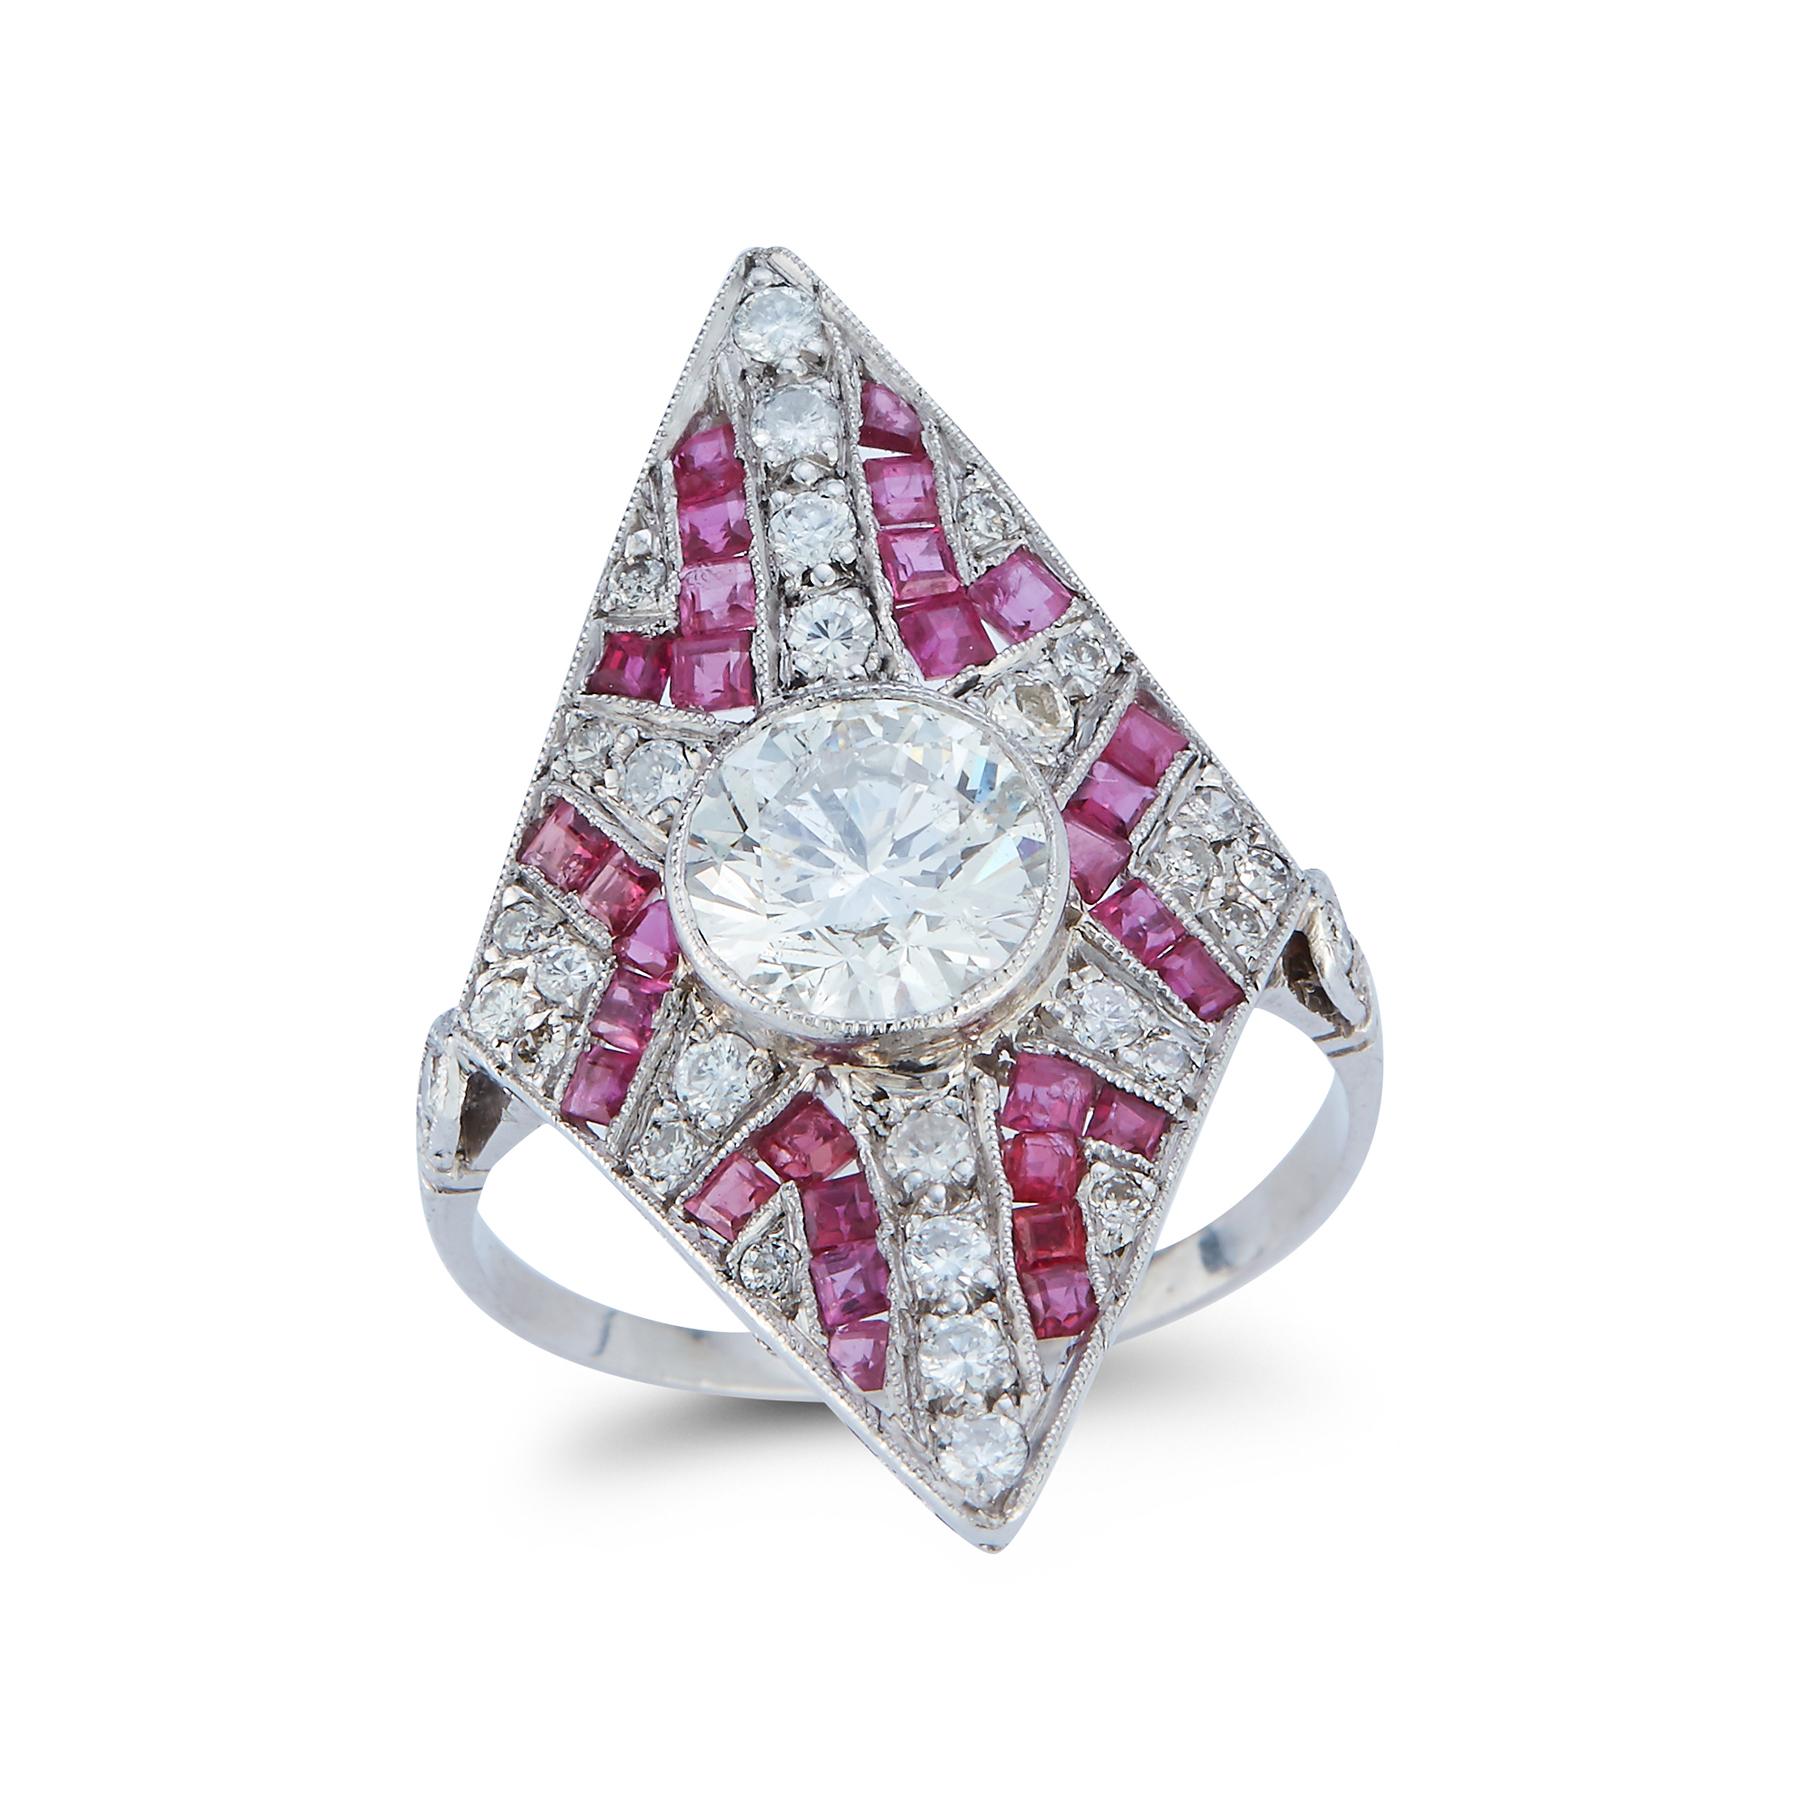 Art Deco Diamond and Ruby Navette Ring
Center round diamond weight: approximately 1.42 cts 
side diamond weight: approximately .40 cts 
ruby weight: approximately 1.00 cts 

Ring Size: 6.75
Re sizable free of charge 
Gold Type: Platinum